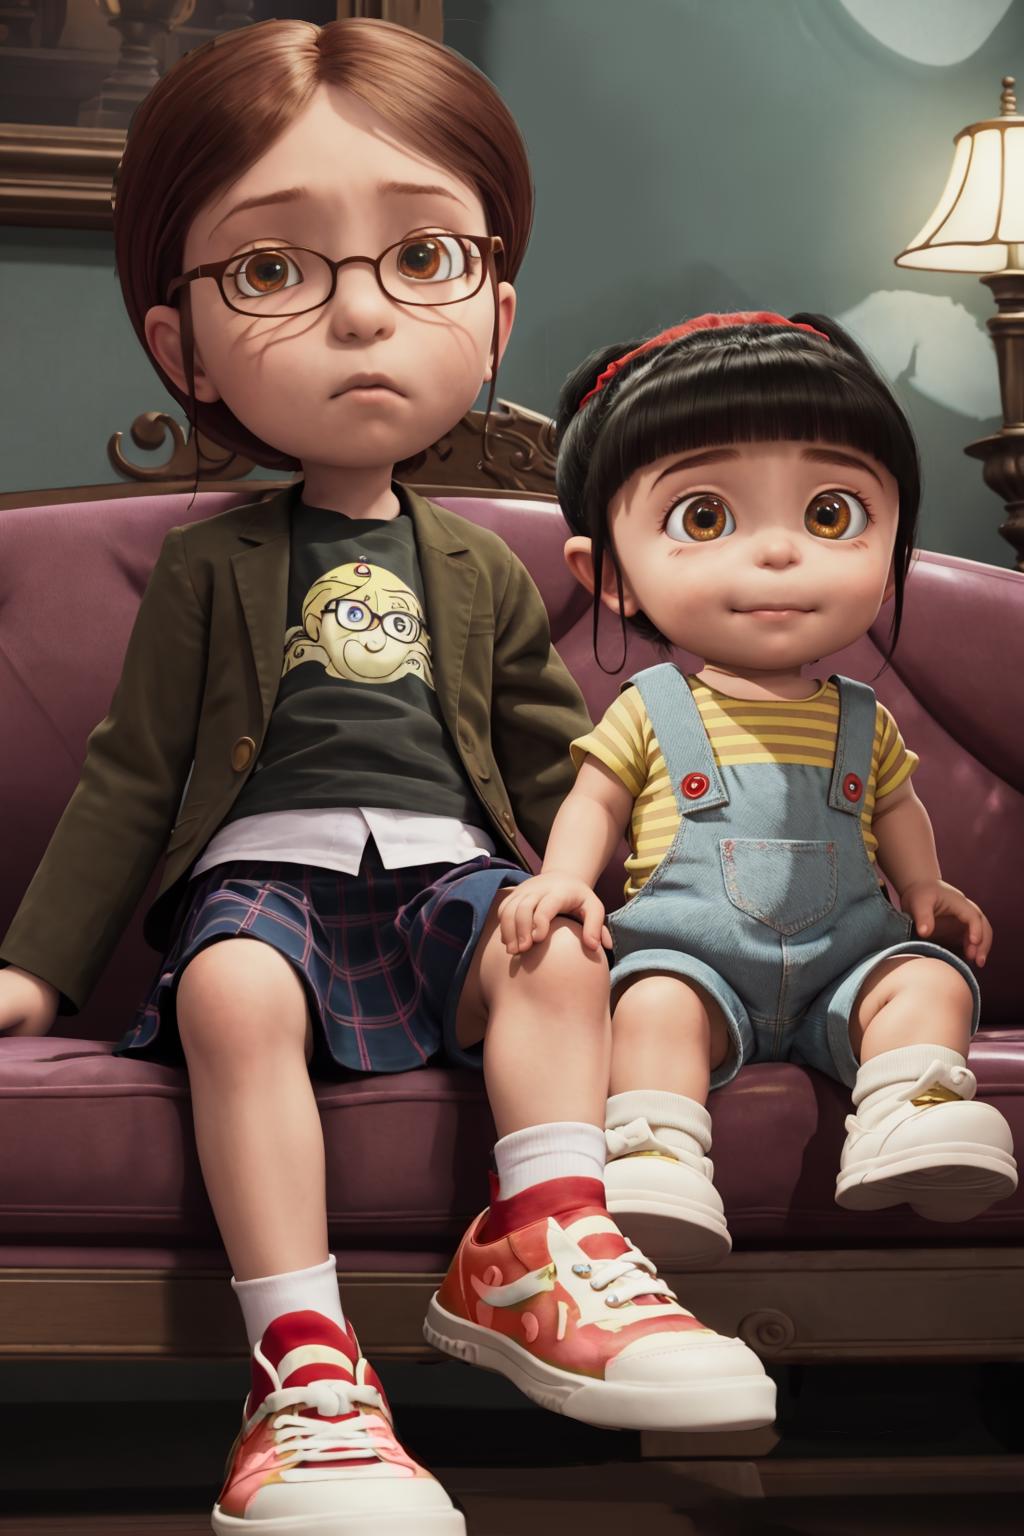 Two Cartoon Characters, a Boy and a Girl, Sitting on a Couch Together.